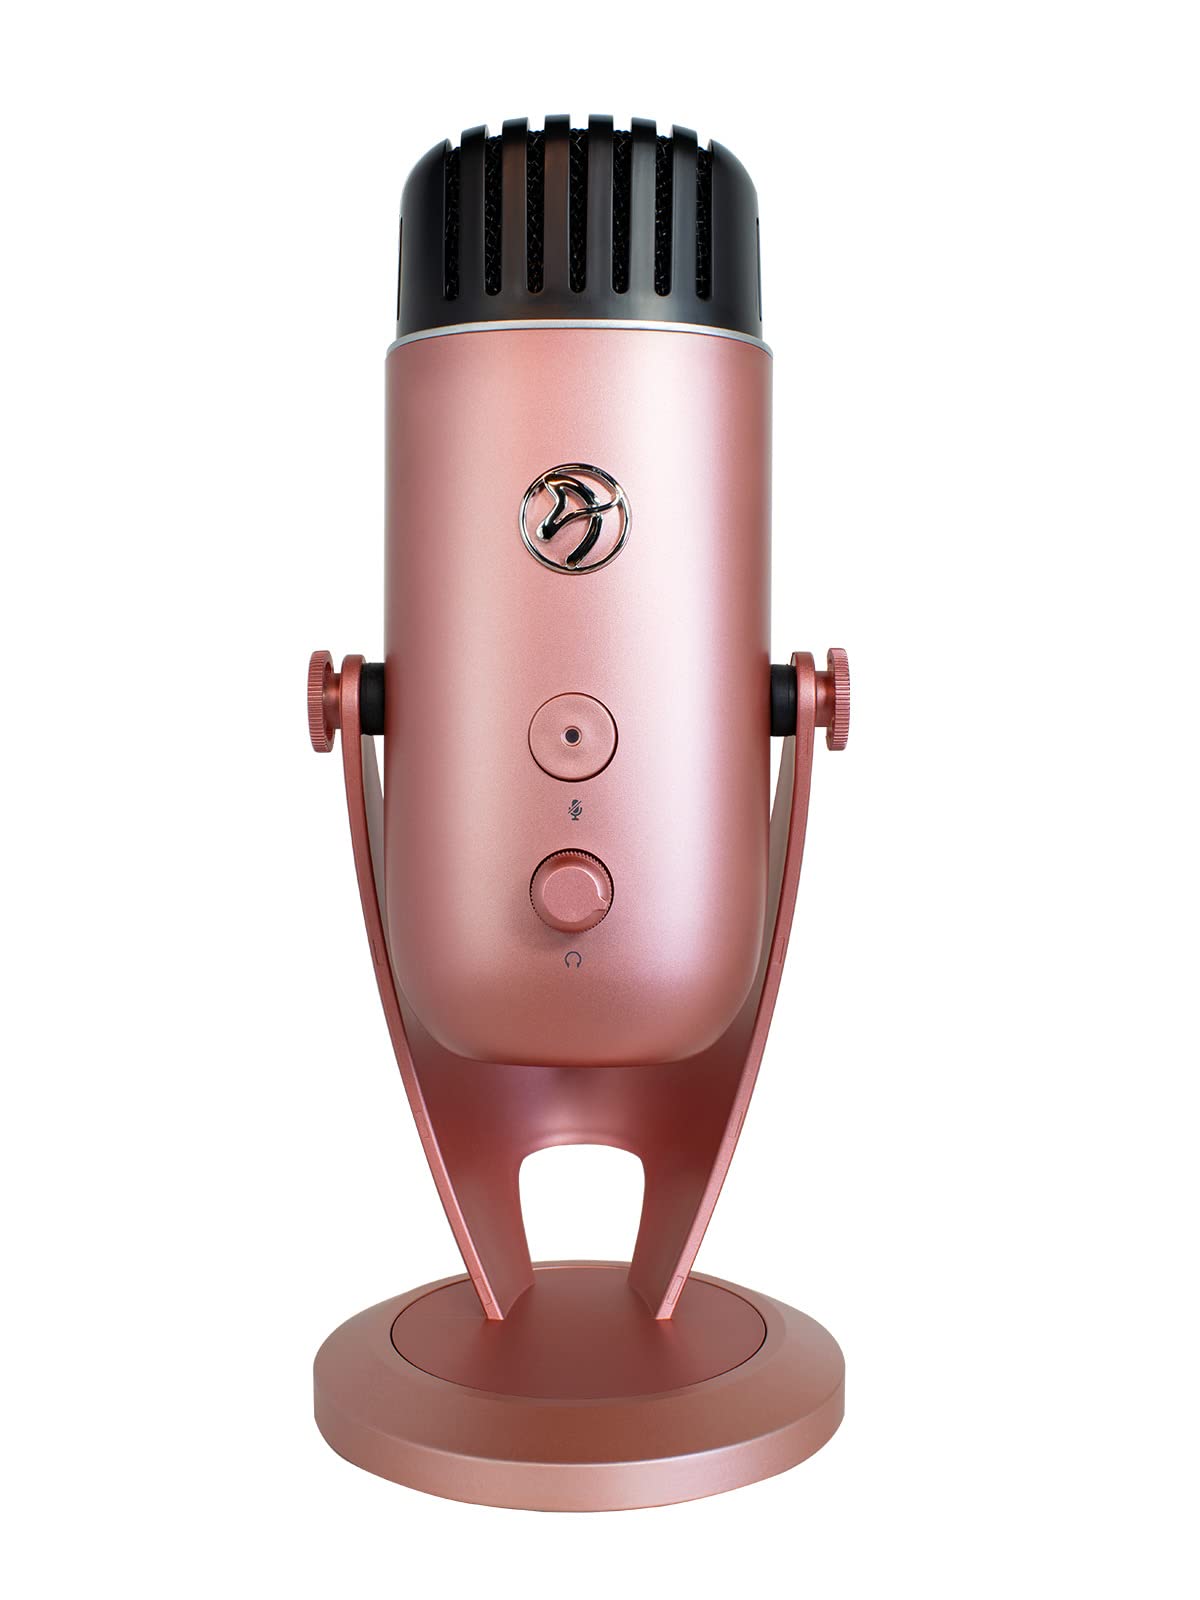 Arozzi Colonna Professional USB Condenser Microphone for PC, Mac, Gaming, Recording, Streaming, Podcasting on PC, Desktop Mic with Multi Pick-up Patterns - Rose Gold